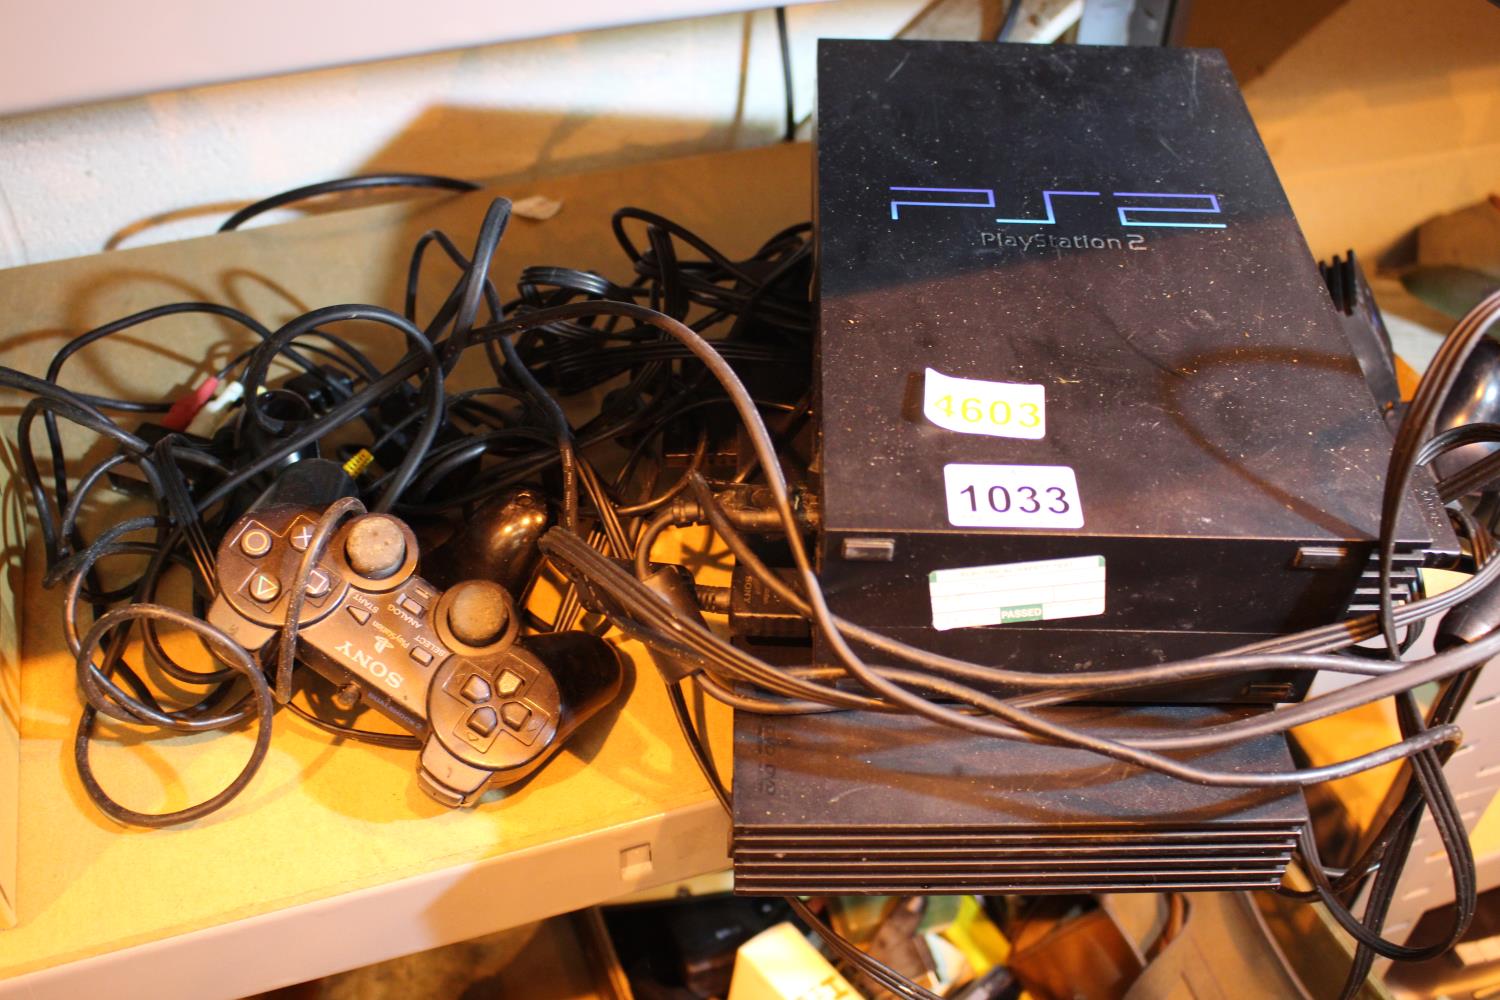 Two PlayStation 2 consoles and three controllers and accessories. Not available for in-house P&P,